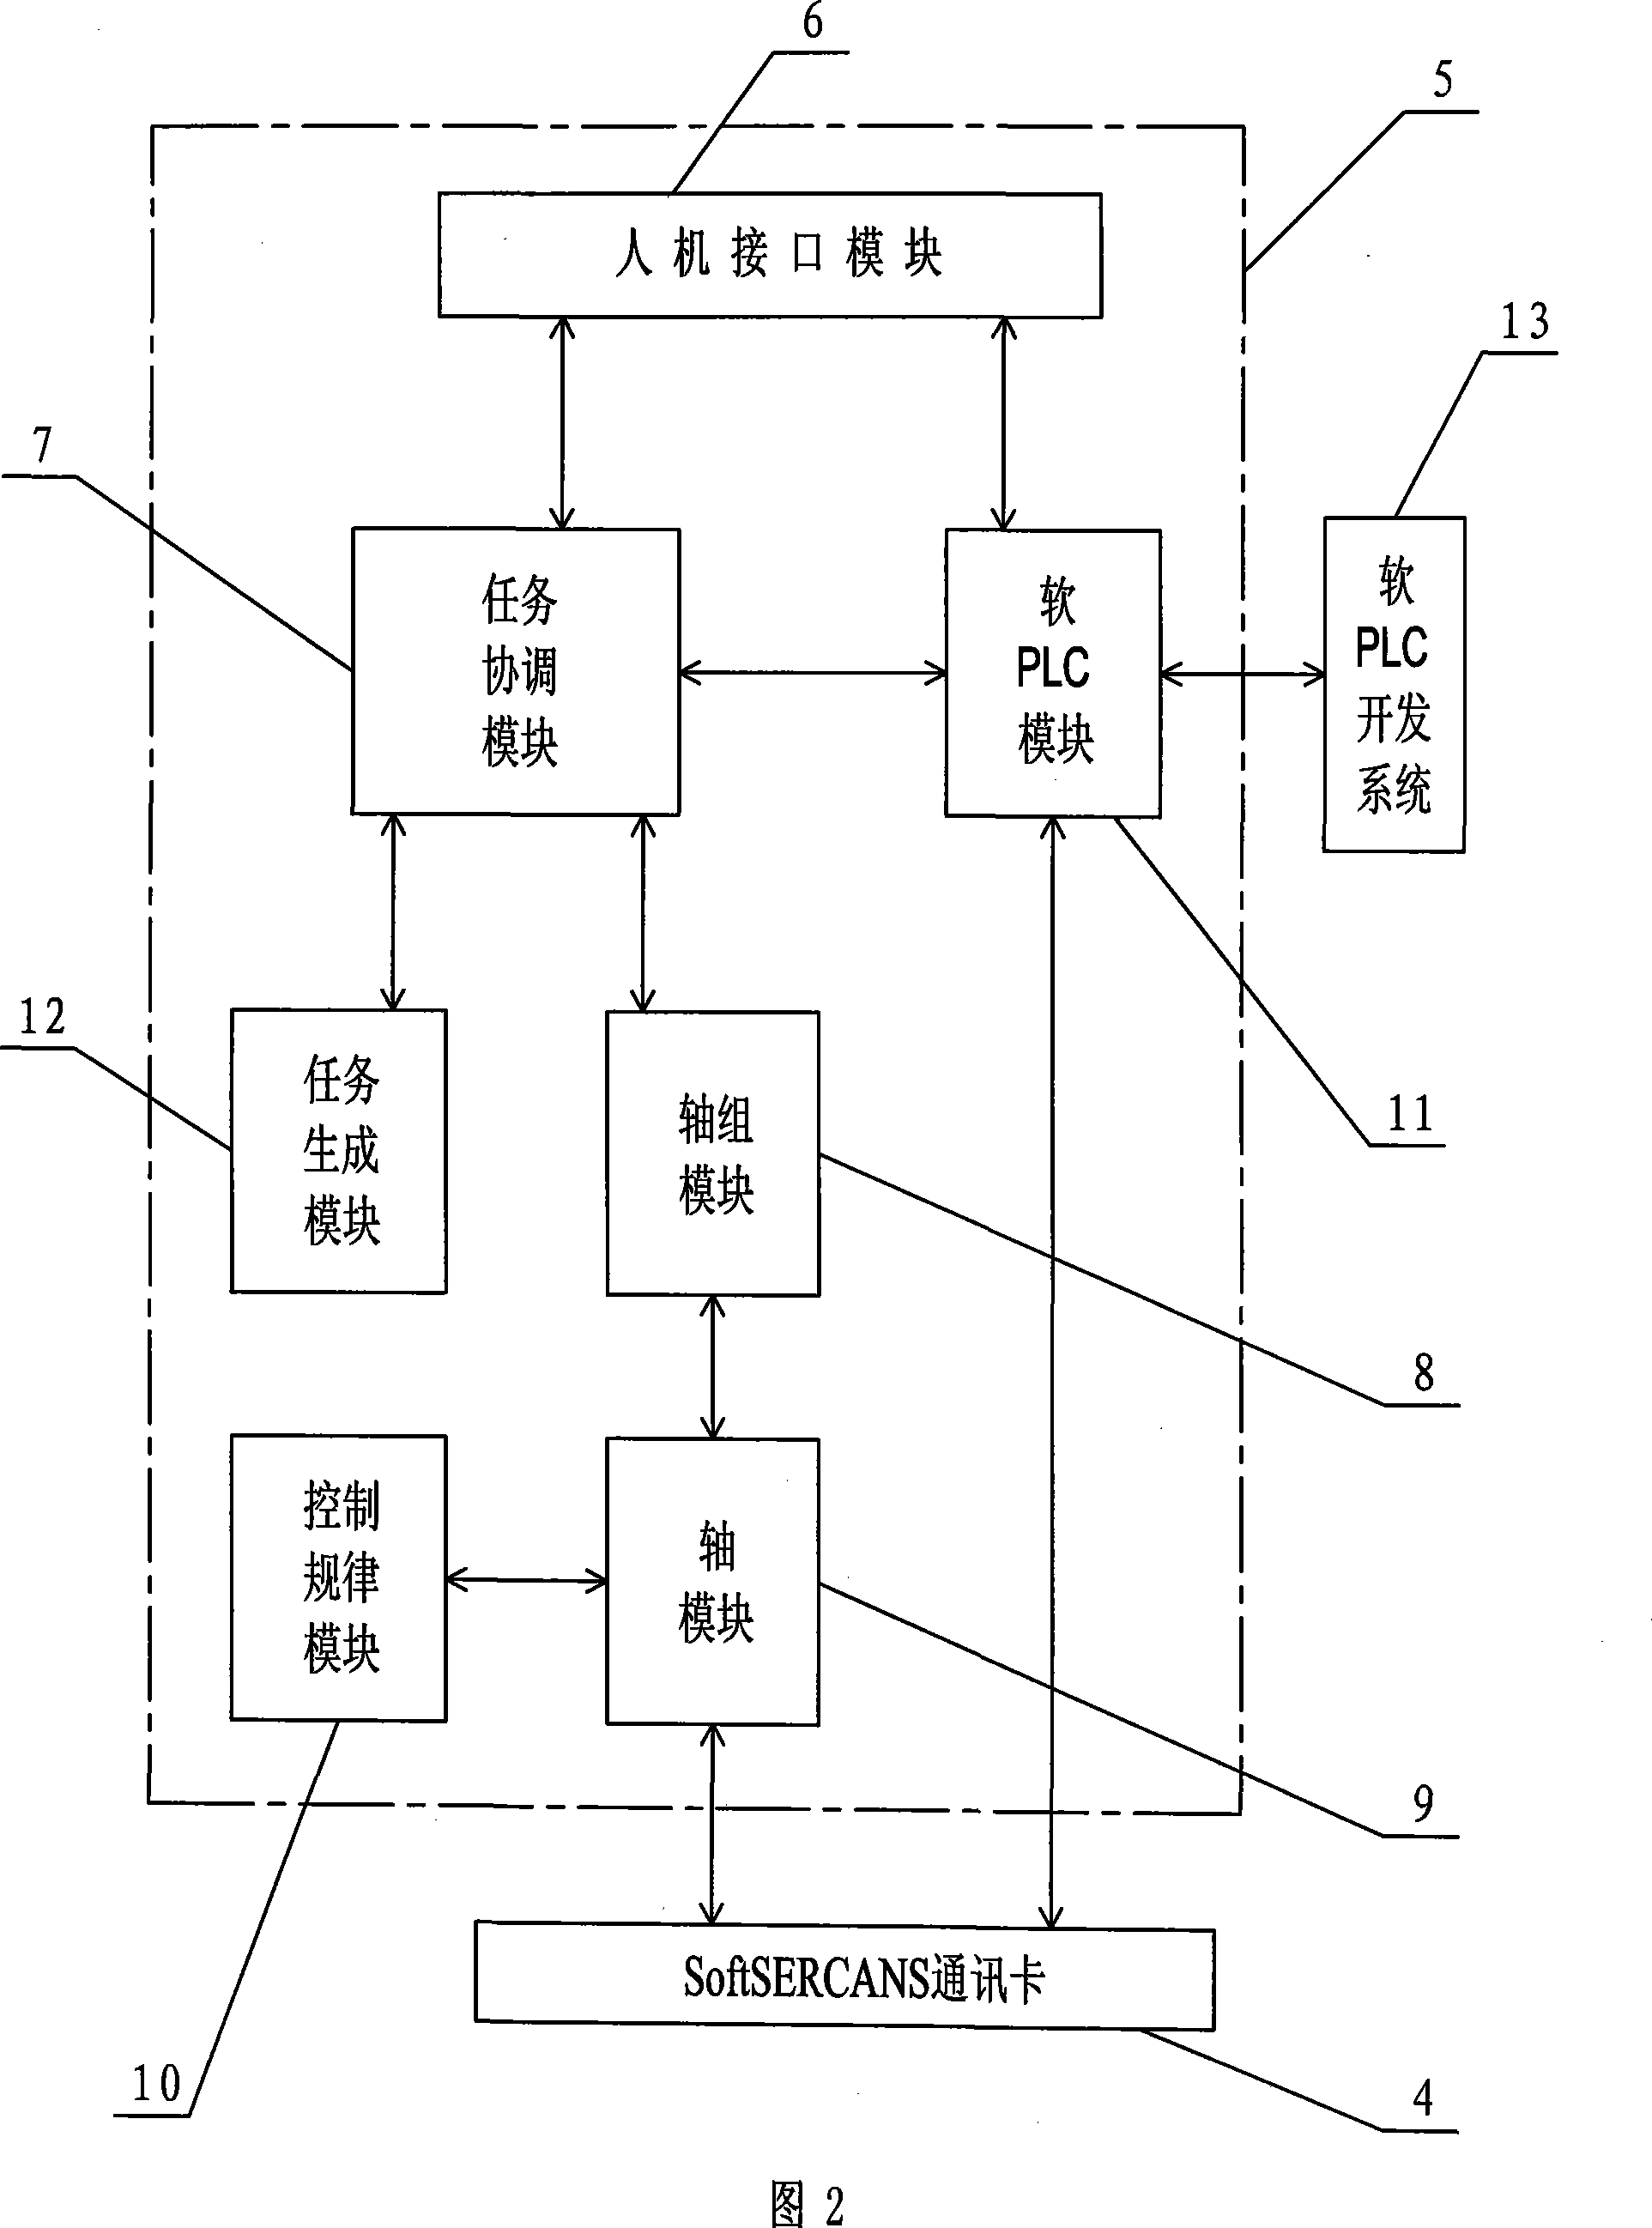 Open type software numerical control system